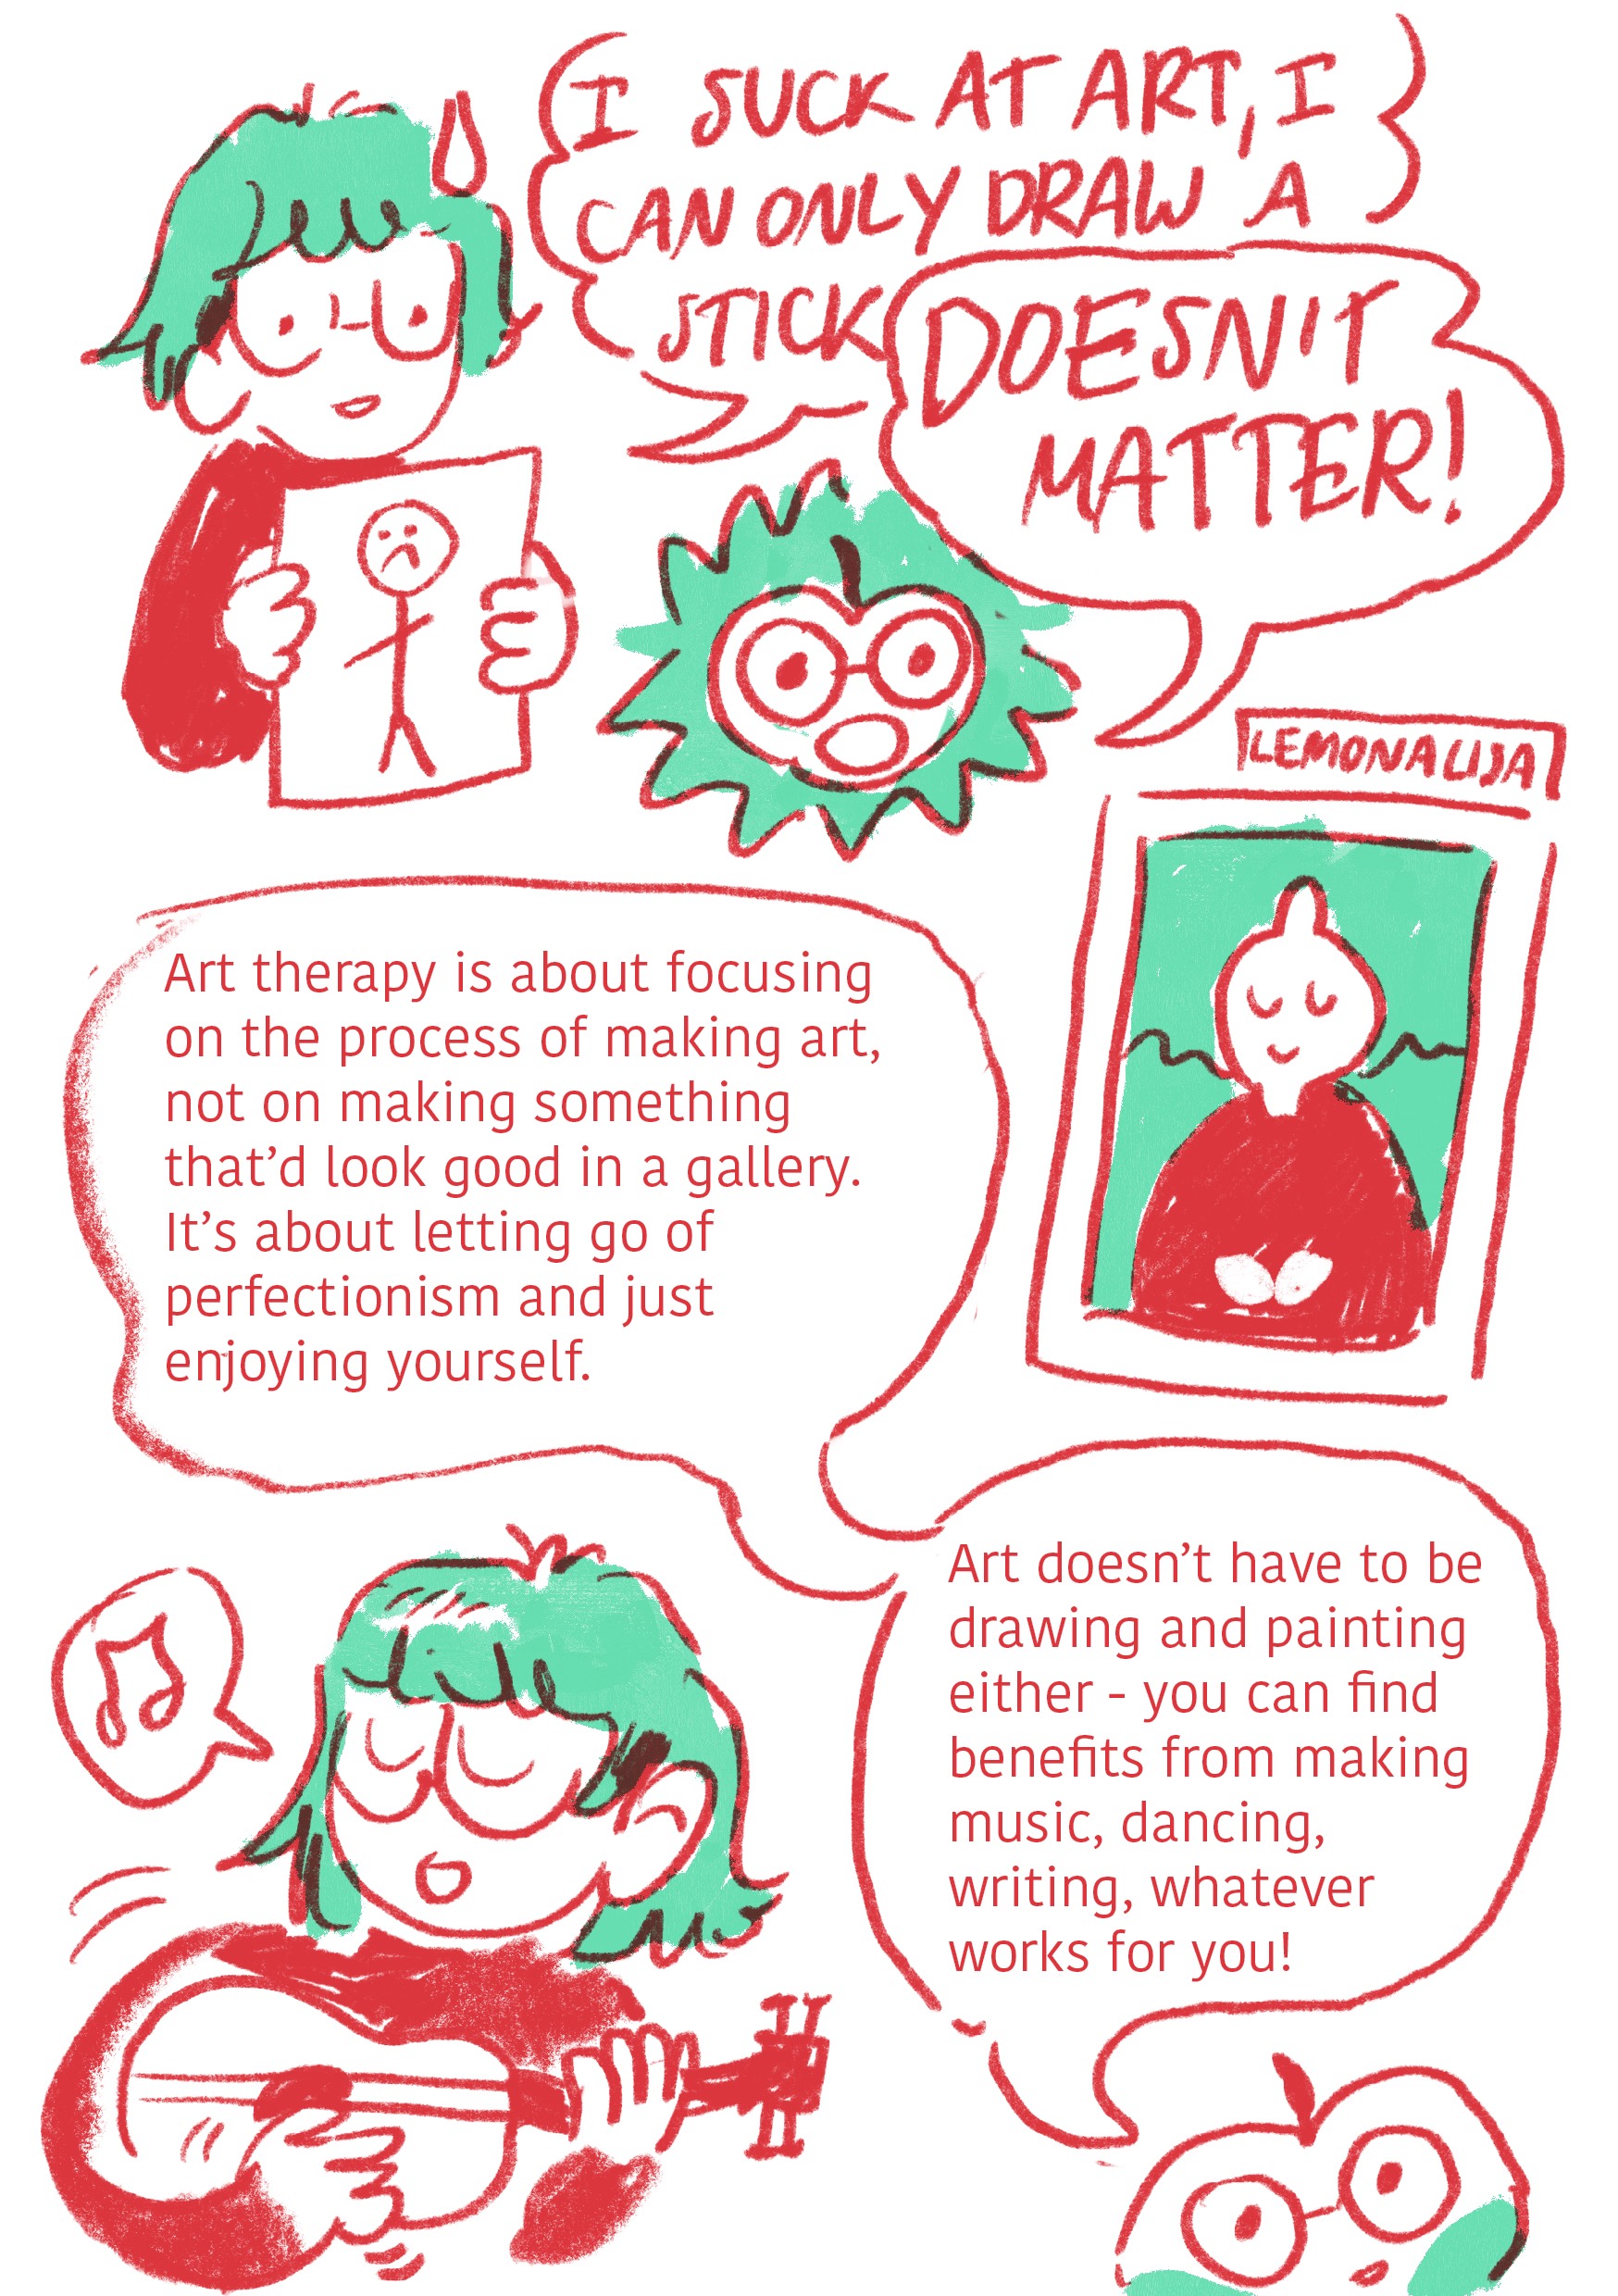 A page from a zine about art therapy by Bethan Jones, describing how one can make art without needing to be 'good' at it, featuring a human character and apple instructor